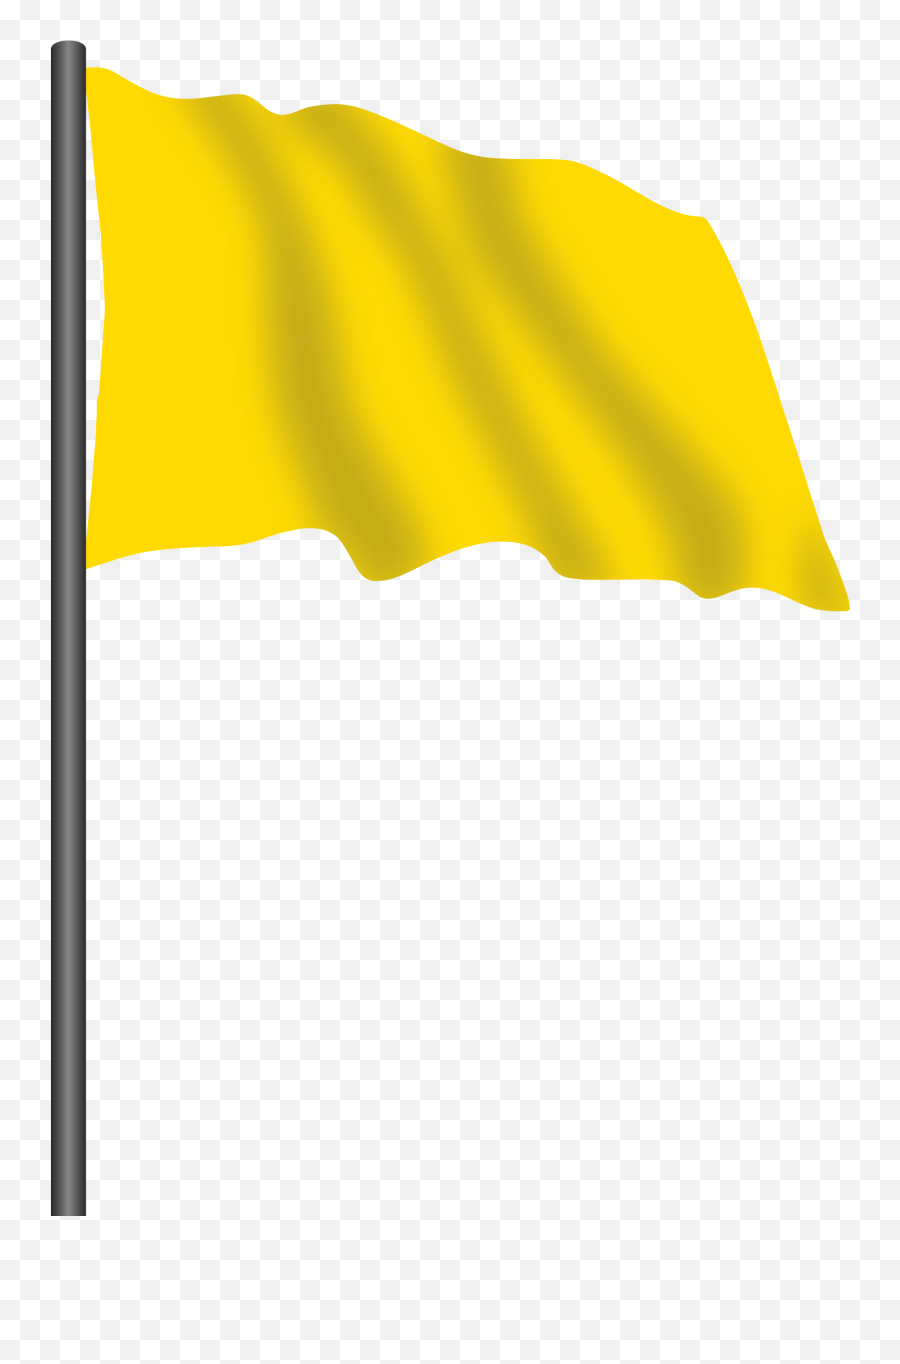 Flags Clipart Yellow Picture 1112515 Flags Clipart Yellow - Yellow Flag Png Emoji,Flag Clipart